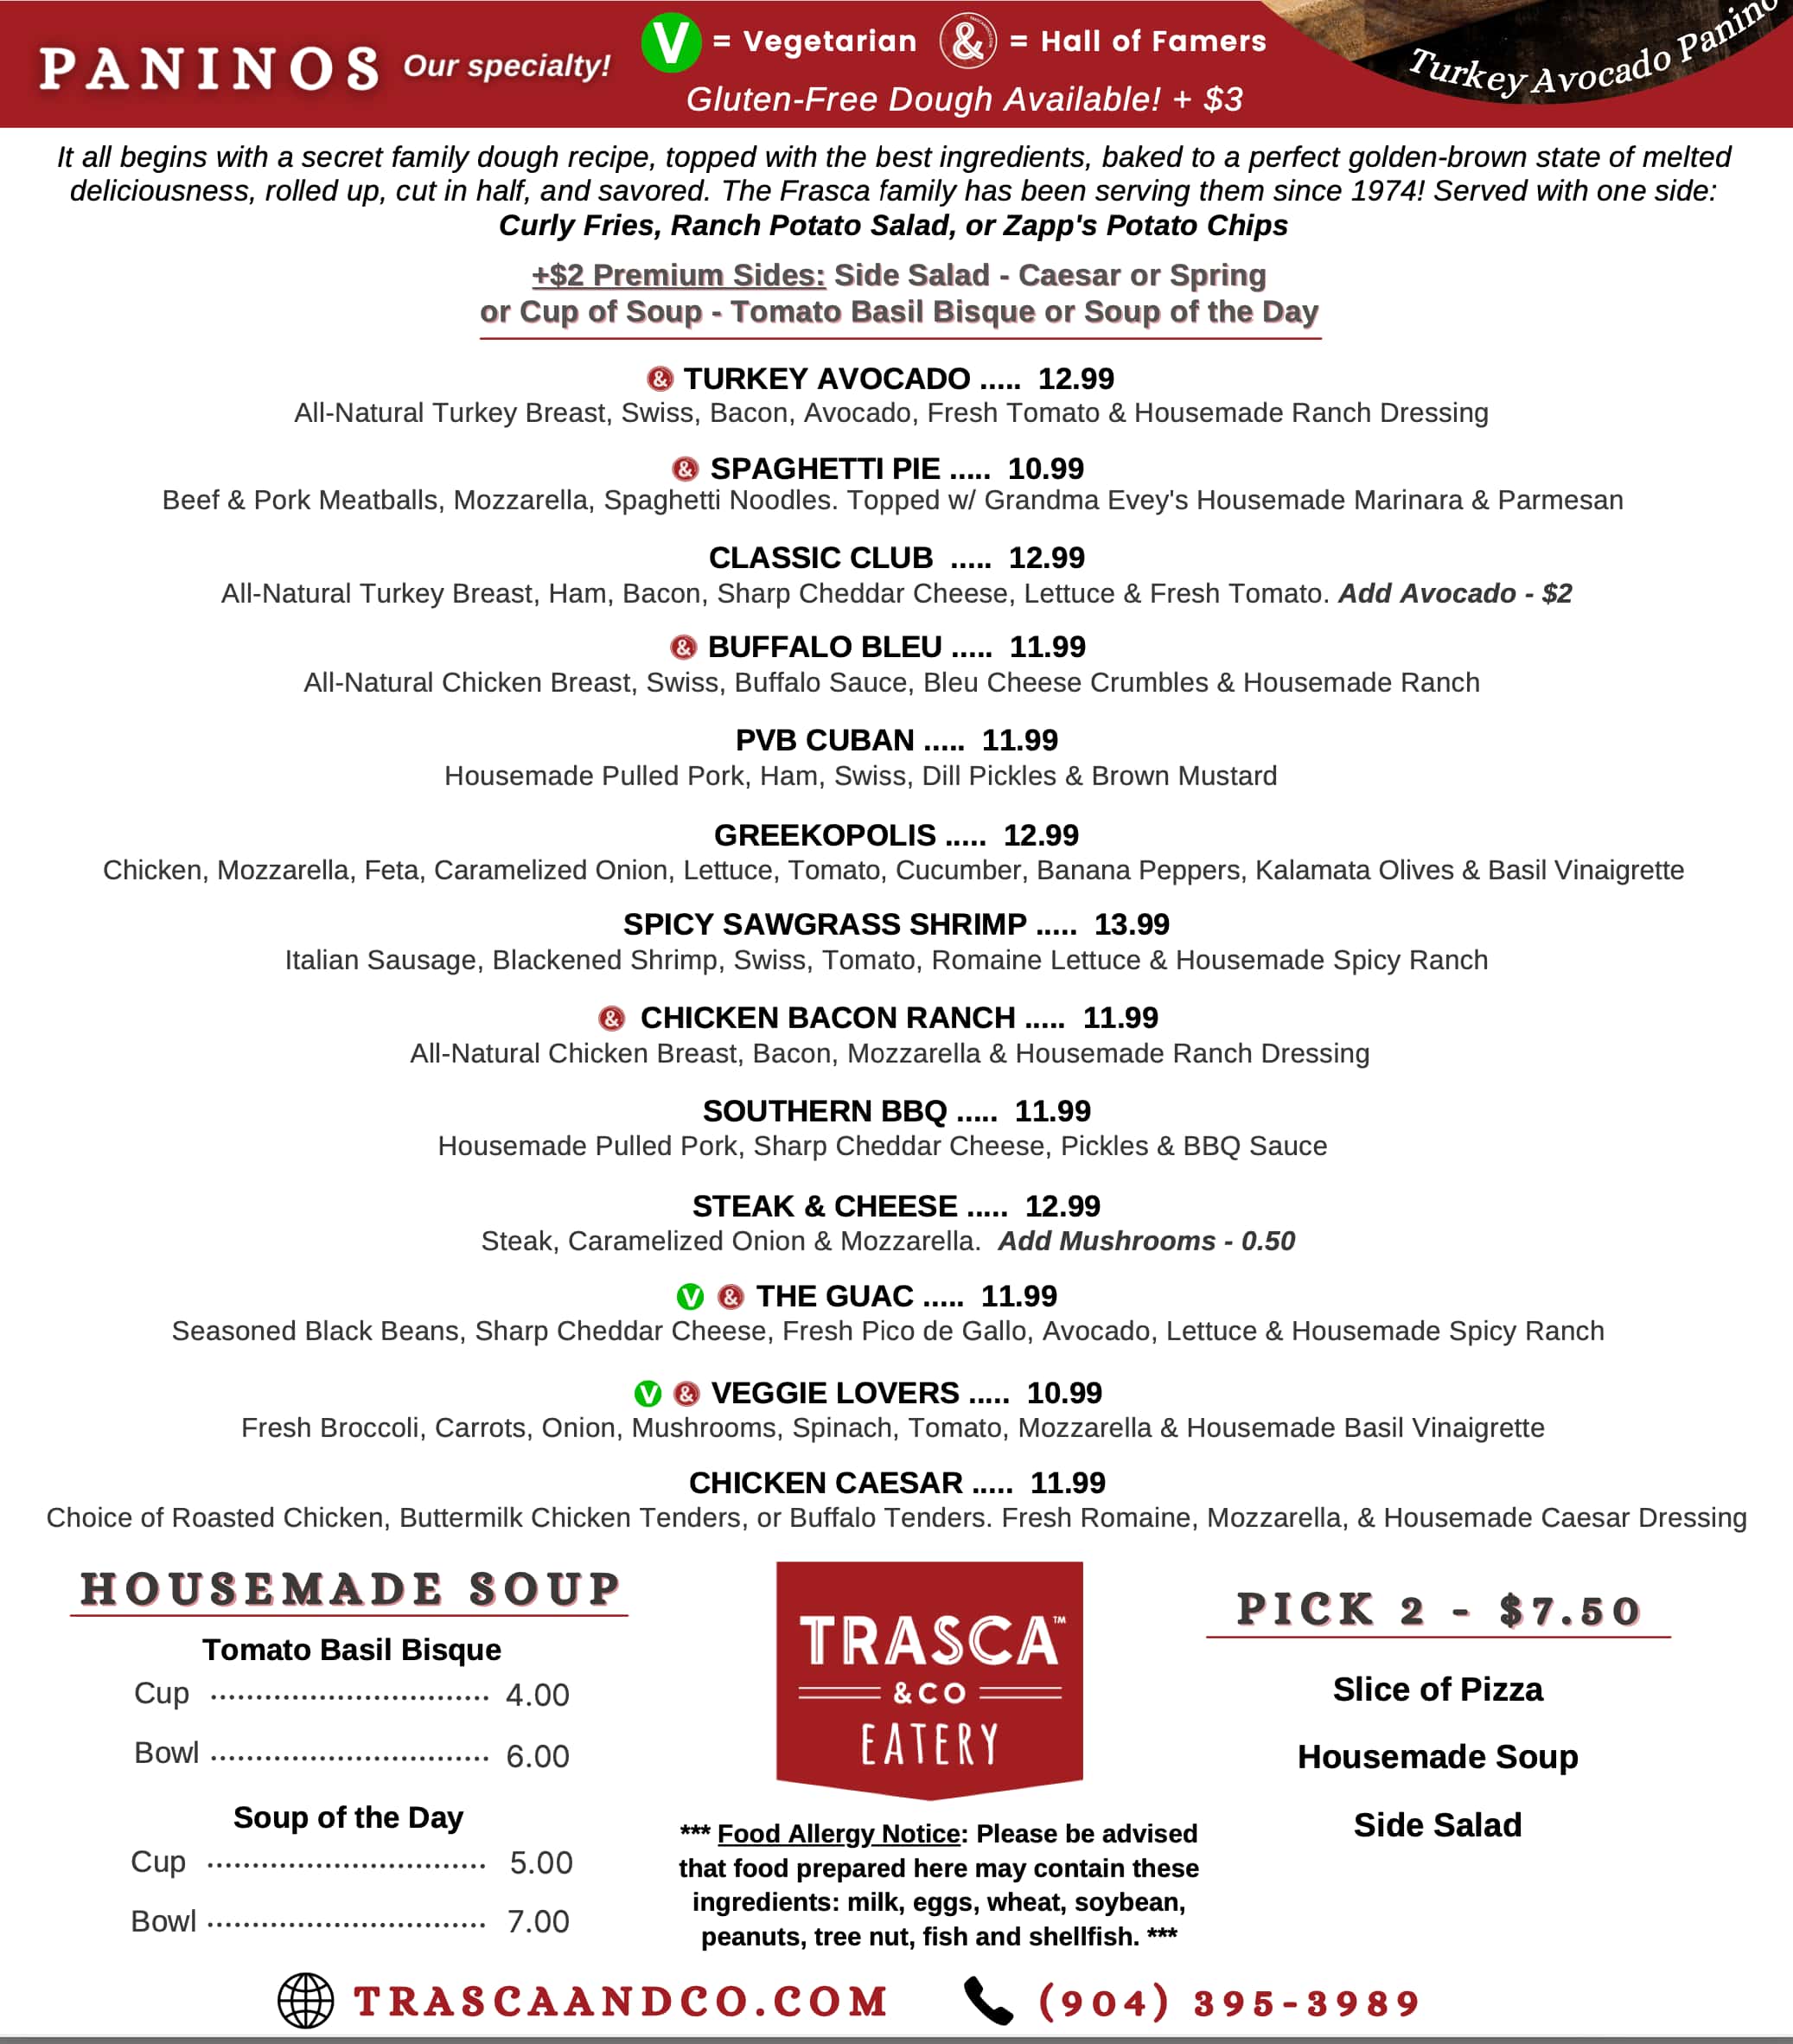 Trasca and Co Eatery Ponte Vedra Beach Paninos and Soup Menu